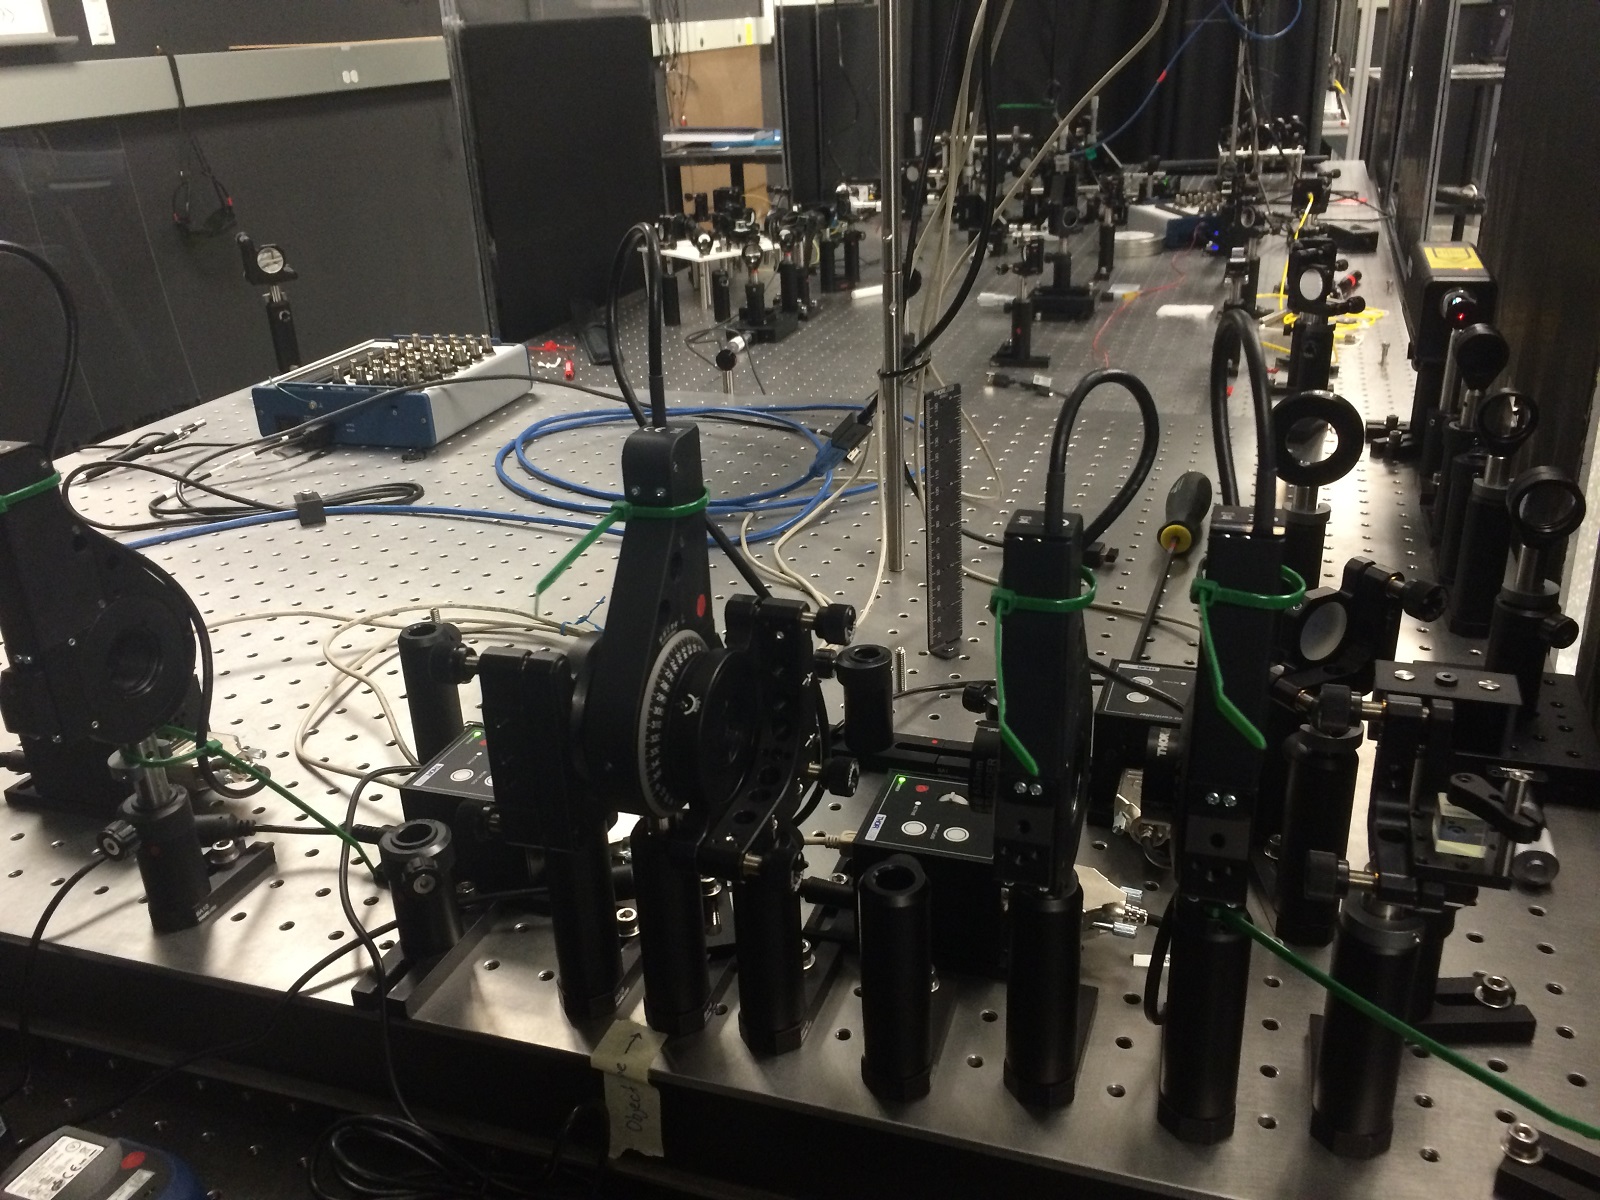 Discovery by uOttawa quantum researchers allows us to see photons and atoms like never before